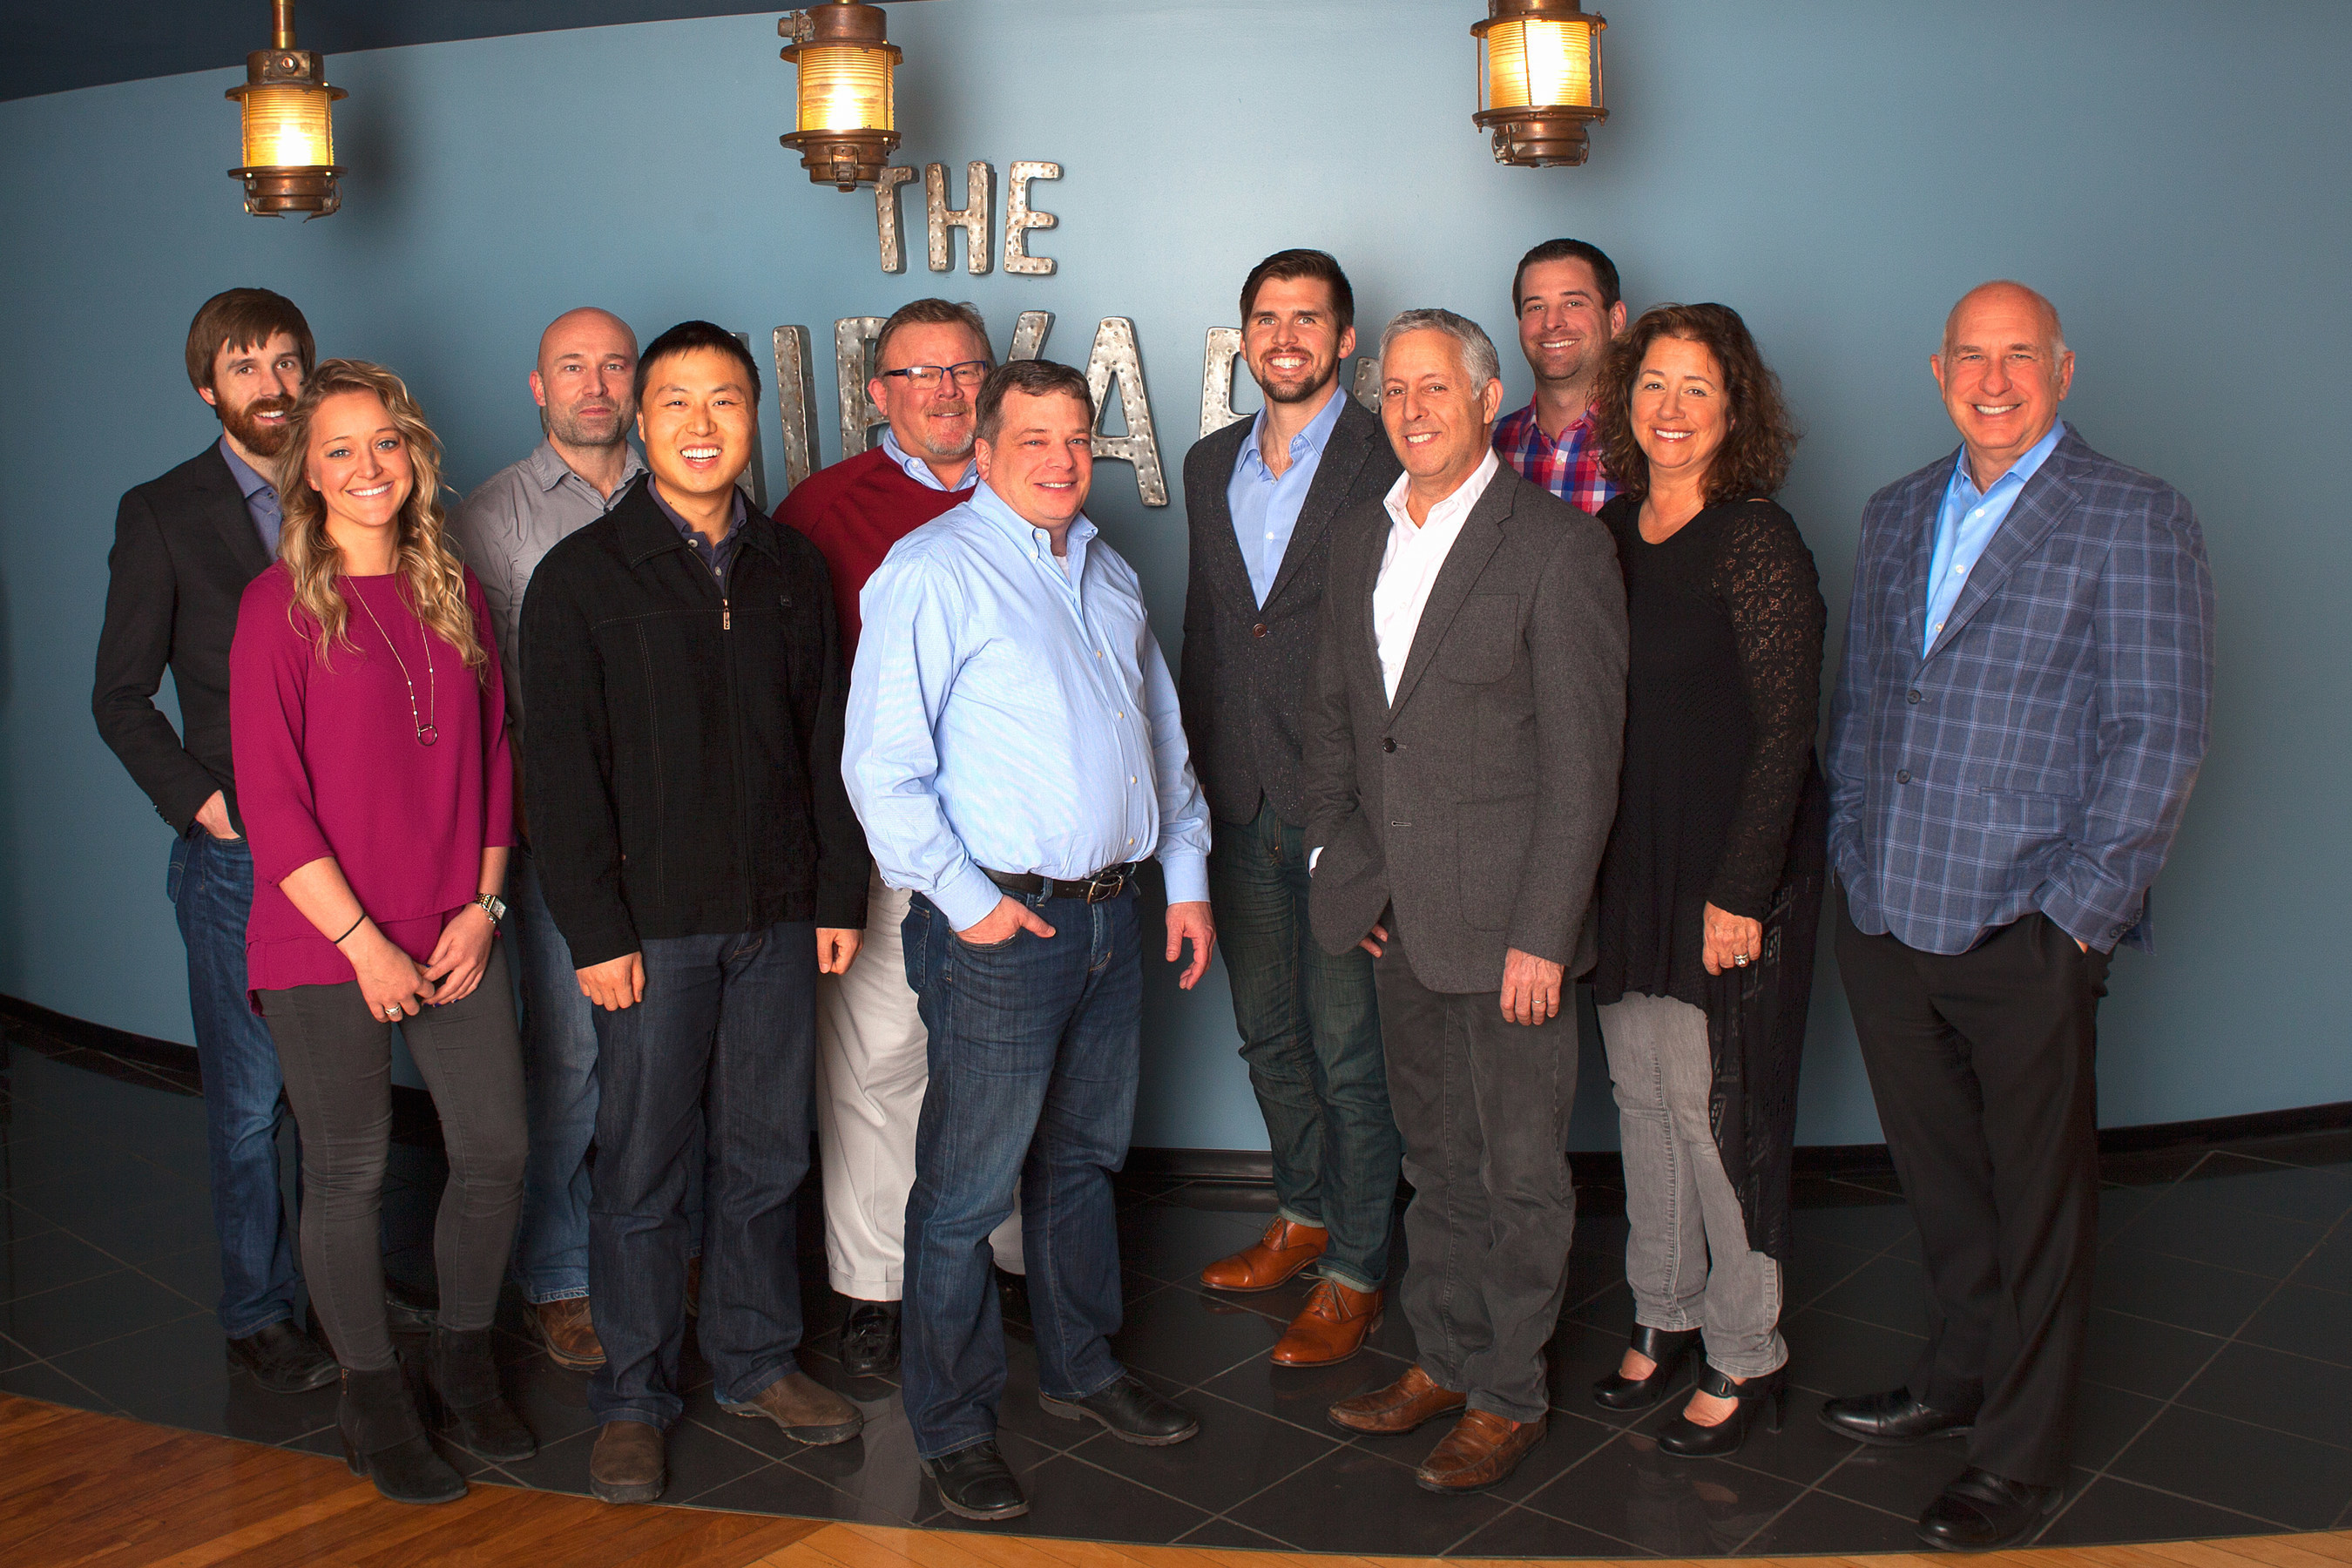 The Mediopolis team: From left to right Ben Clarke, Chief Strategist, President, The Shipyard ; Sara Landries, Broadcast Buyer; Joel Acheson, Director of Organic Strategy & Web Analytics; Dr. Cheng Chen, Data Science Developer ; Rob Simmons, CFO; Ross Capers, Media Director; Dan Sorenson, Paid Media Analysis; Jon Bond, Co-Chairman; Jared McKinley, Director of Paid Media; Pattie Glod, President, Mediopolis; Rick Milenthal, Co-Chairman